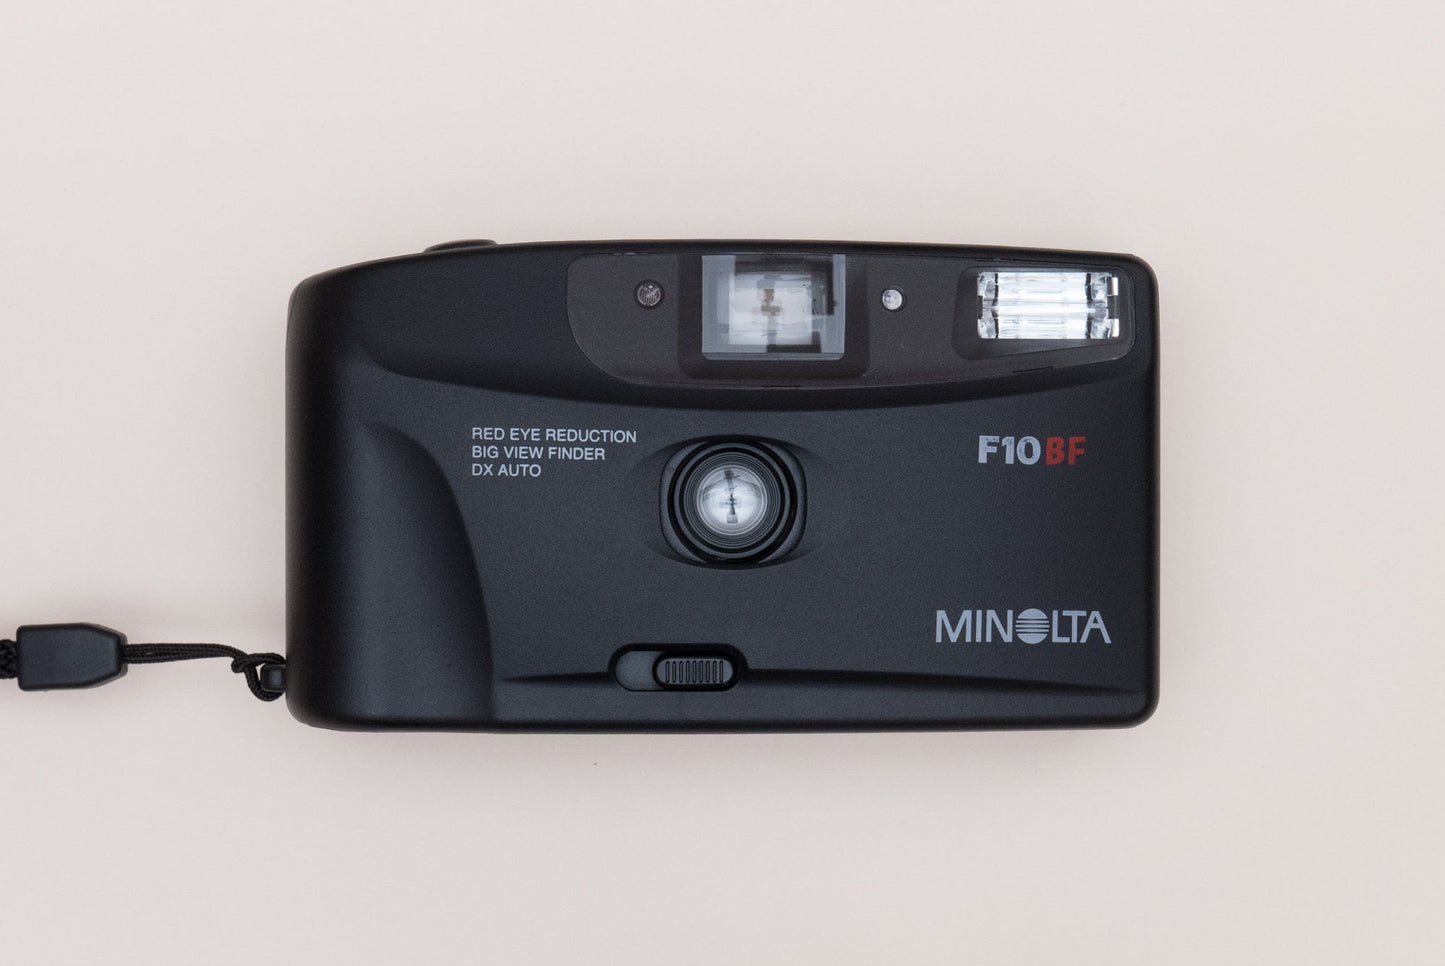 Minolta F10BF Compact 35mm Point and Shoot Film Camera